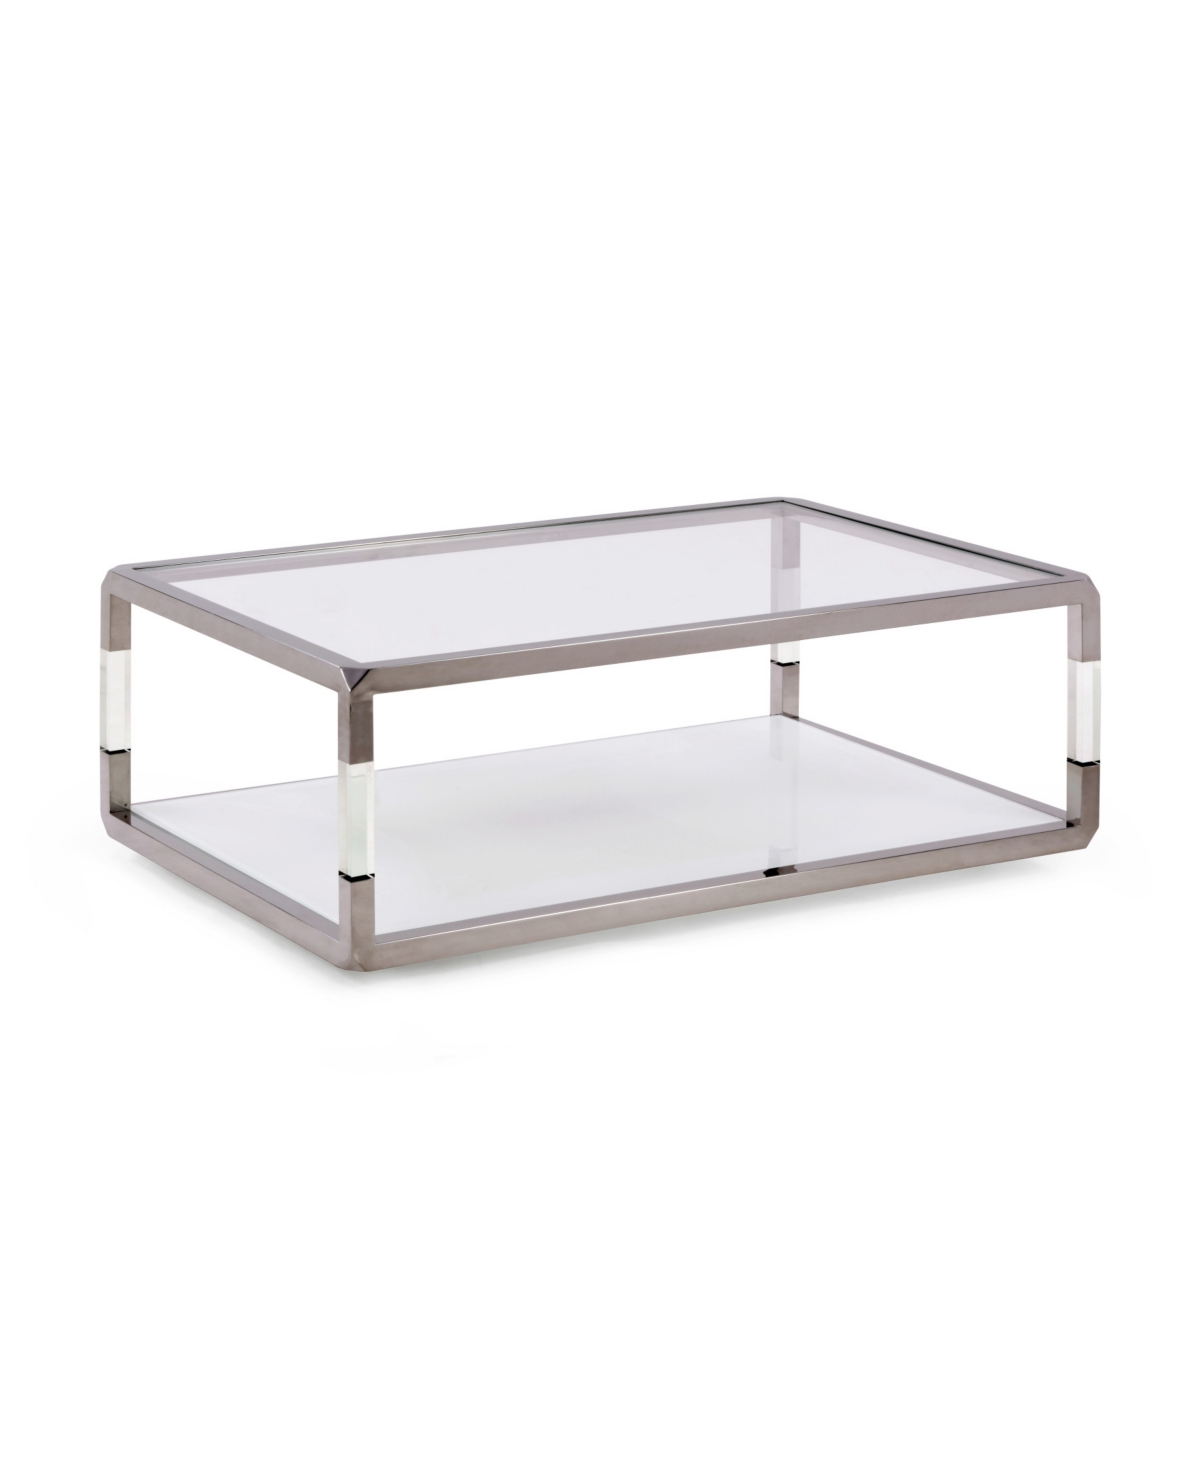 Macy's Jasper 48" Glass Coffee Table In Clear Glass,acrylic And Pss